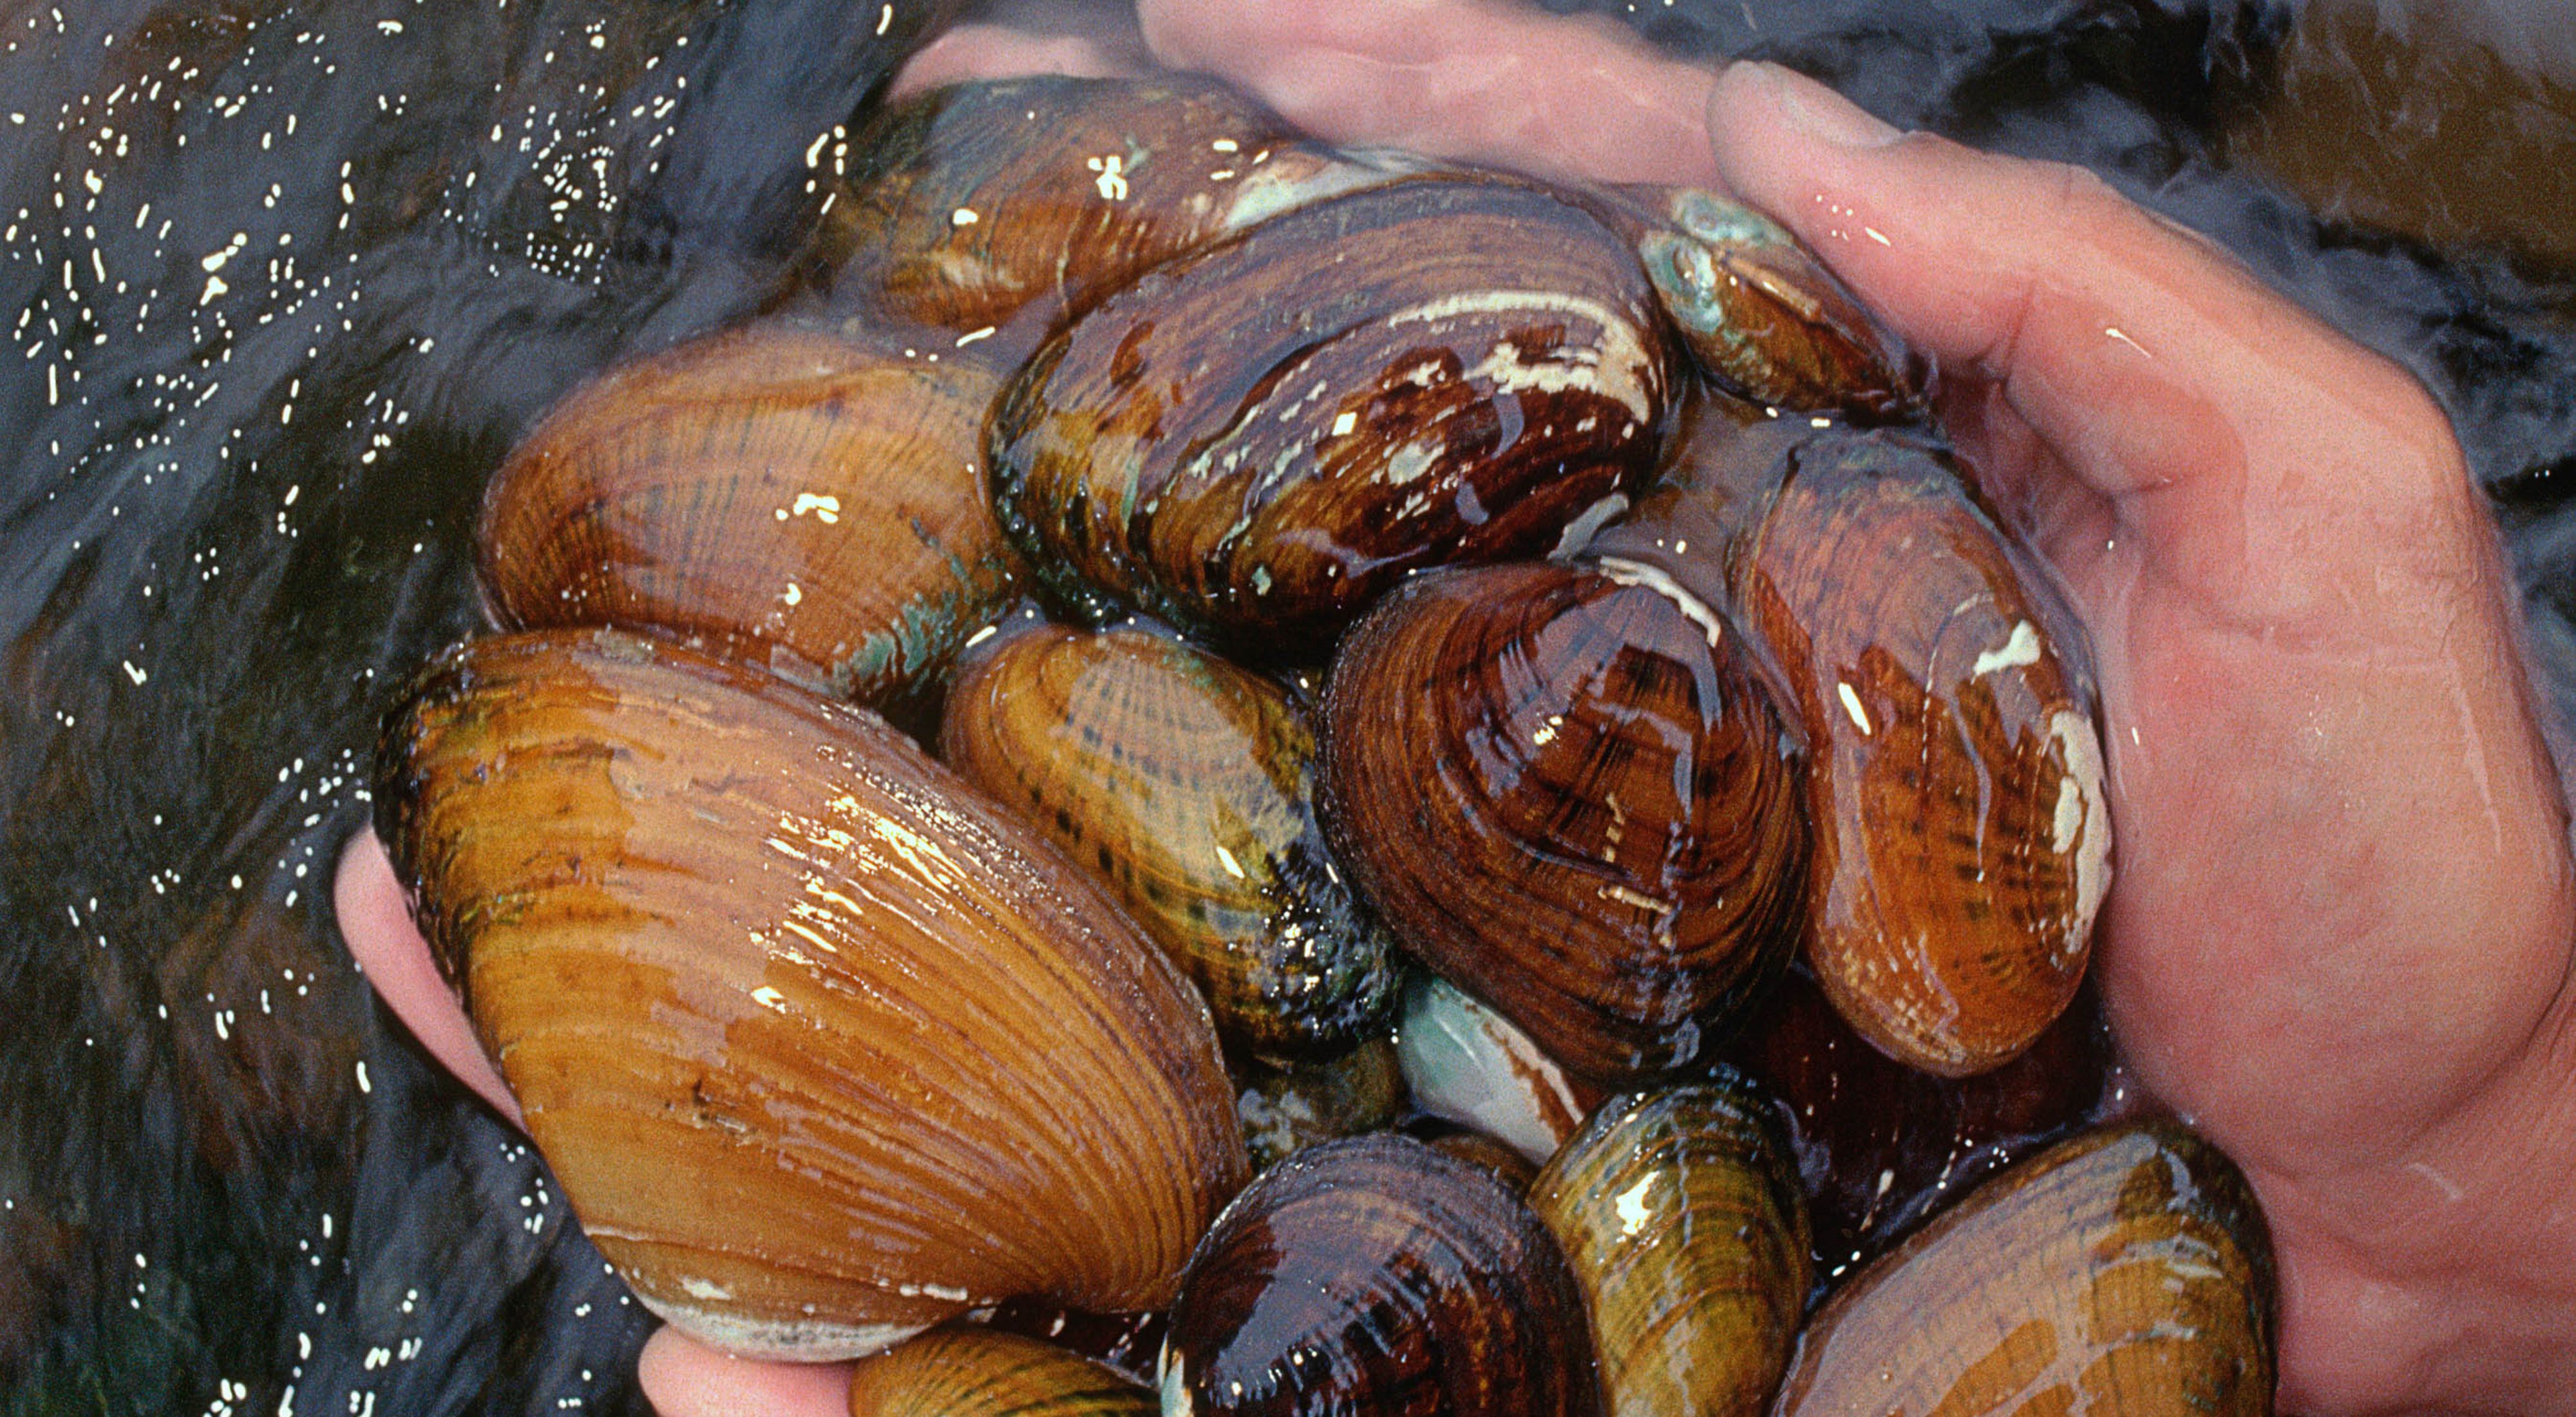 A collection of wide, ridged freshwater mussels are held in two cupped hands.